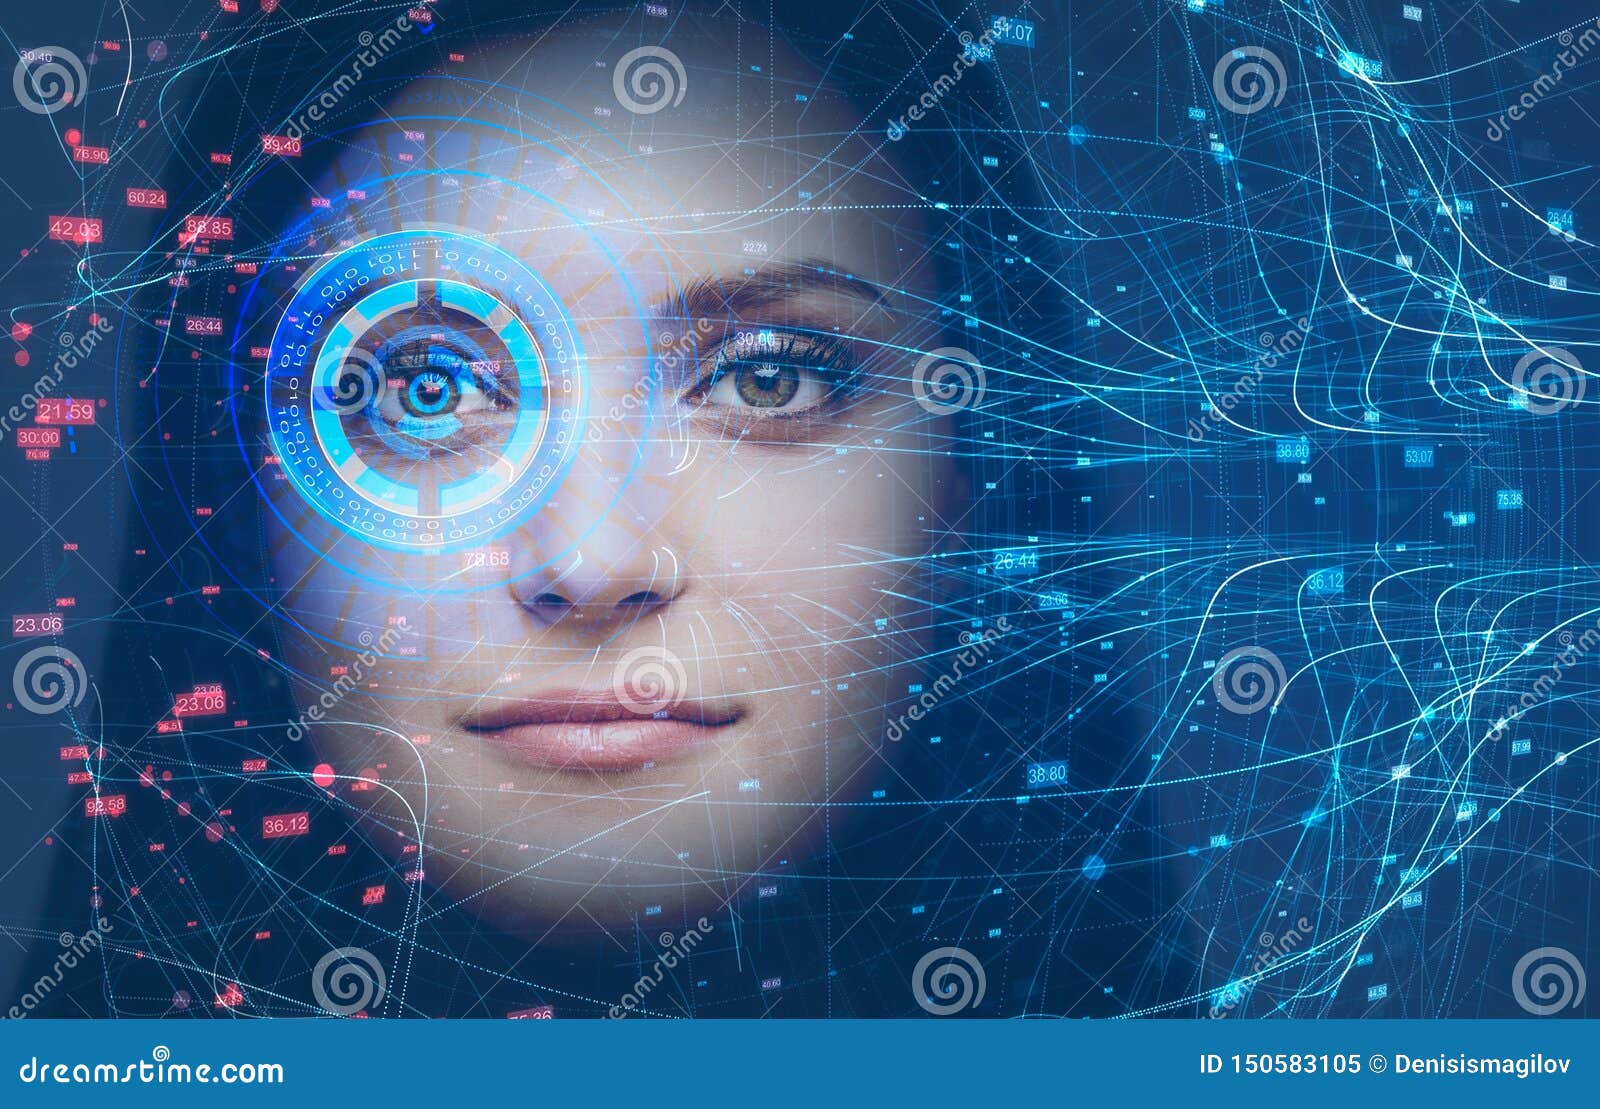 woman head, face recognition technology and hud